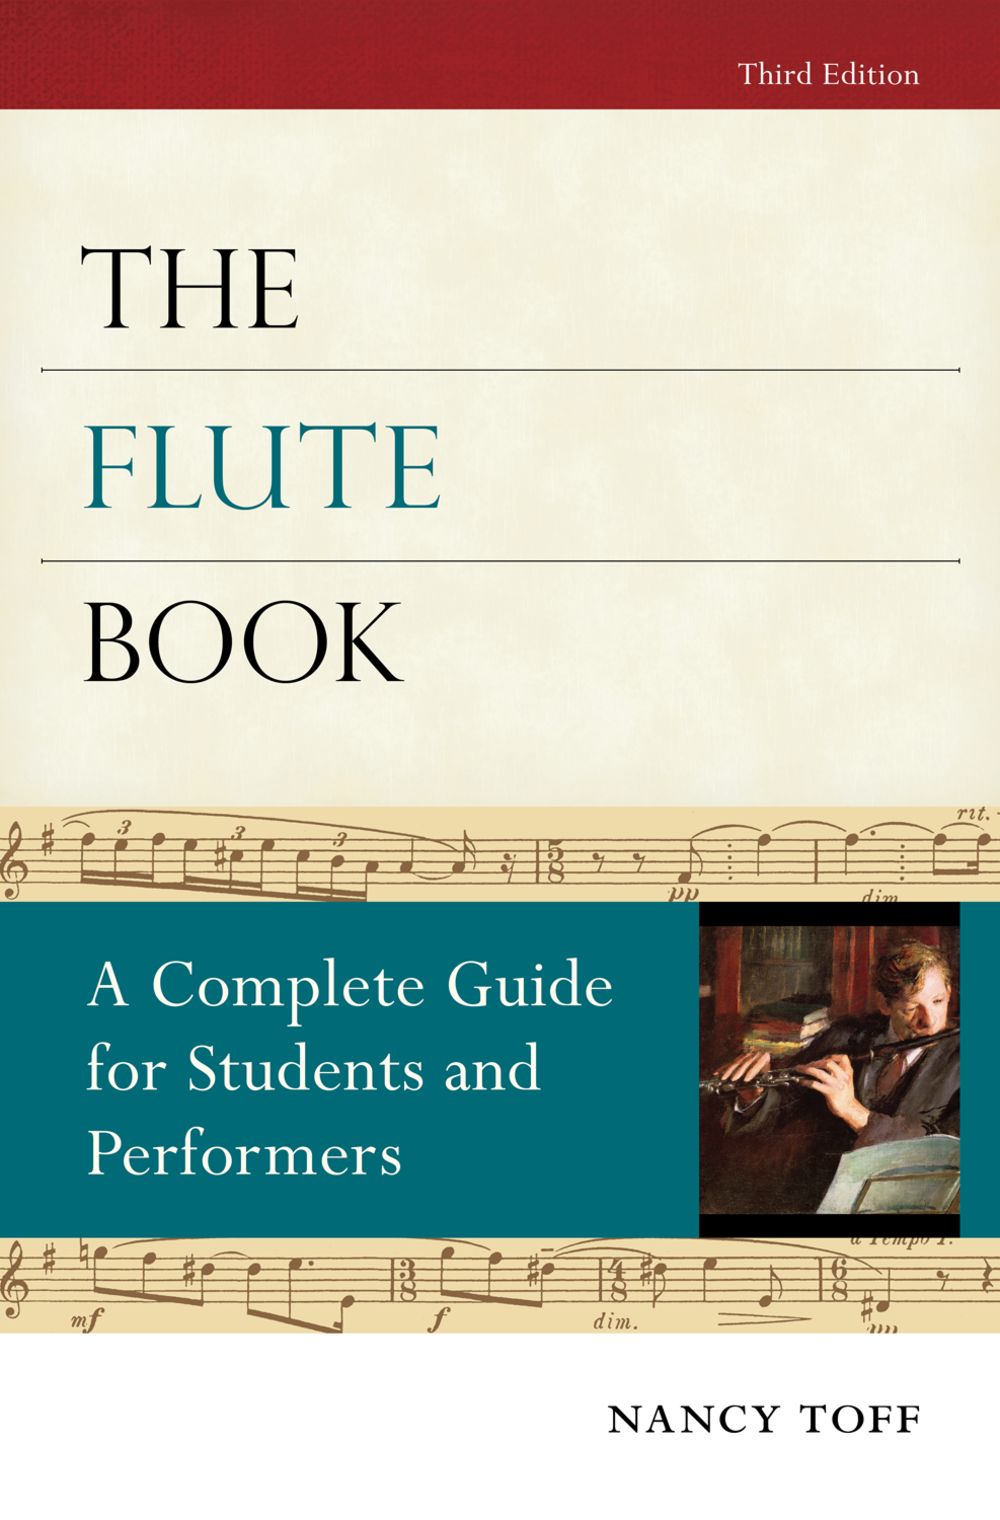 Toff The Flute Book Third Edition Hardback Sheet Music Songbook